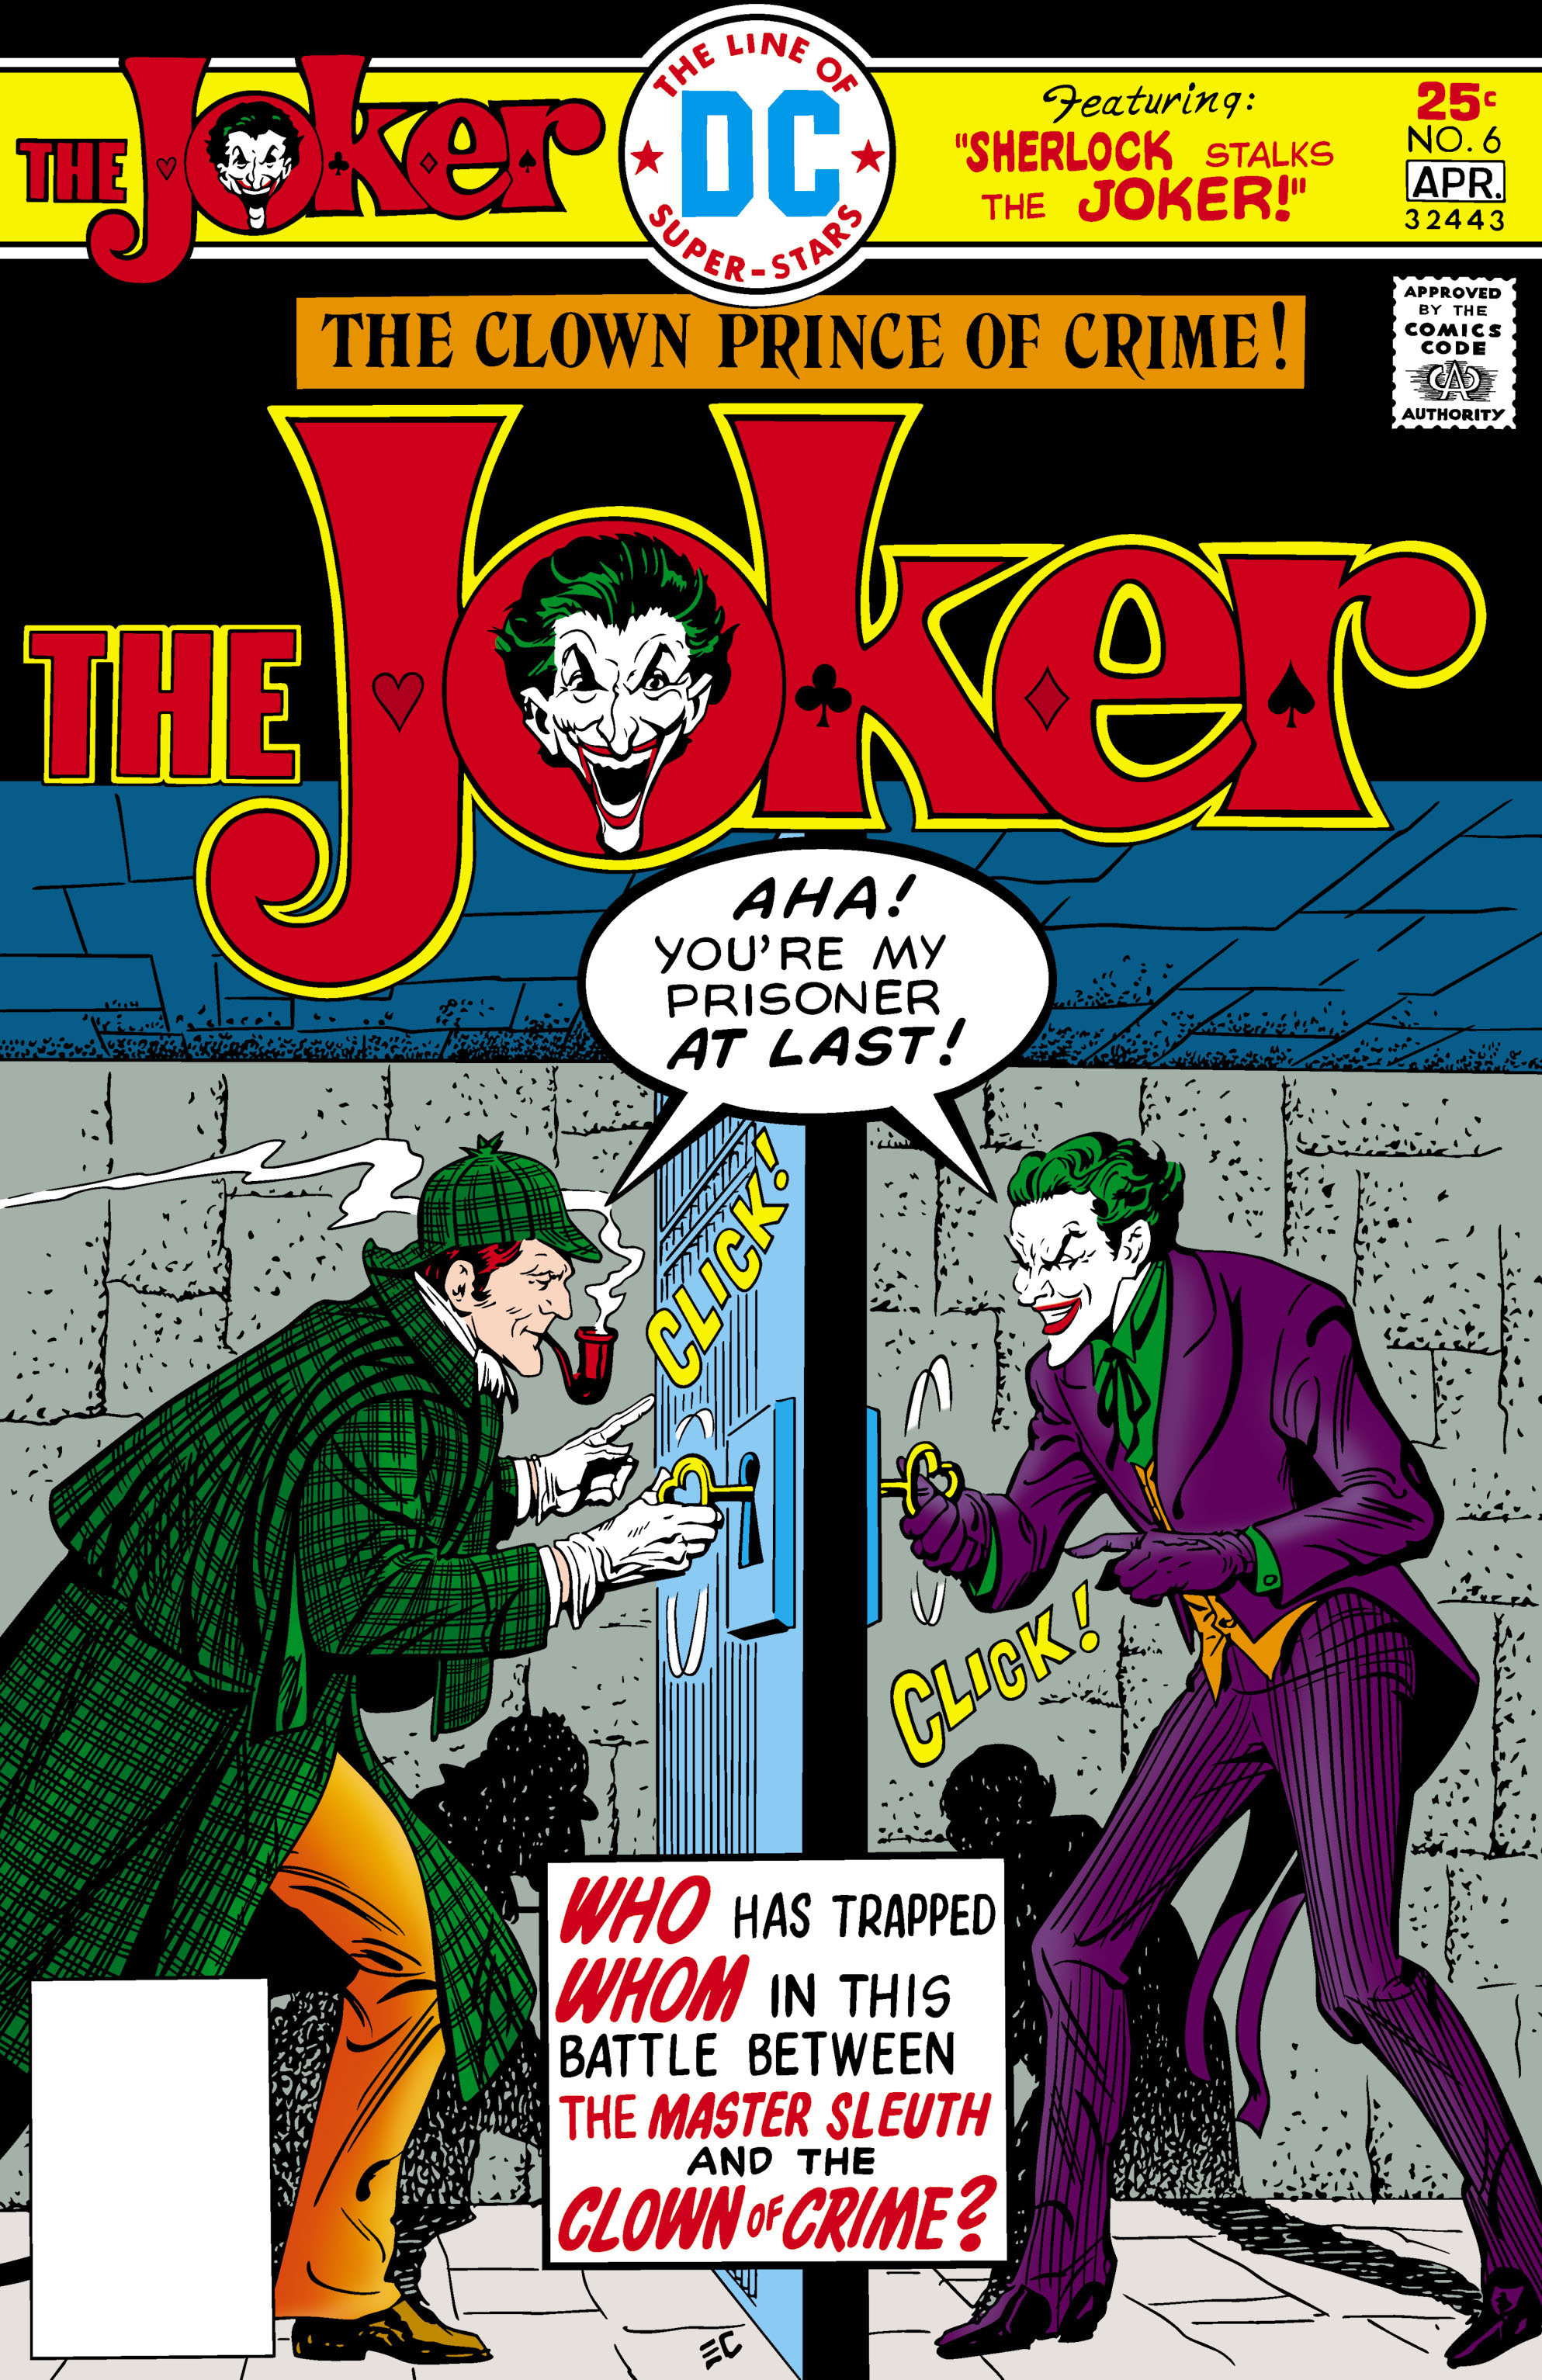 The Joker (1975-1976 + 2019): Chapter 6 - Page 1